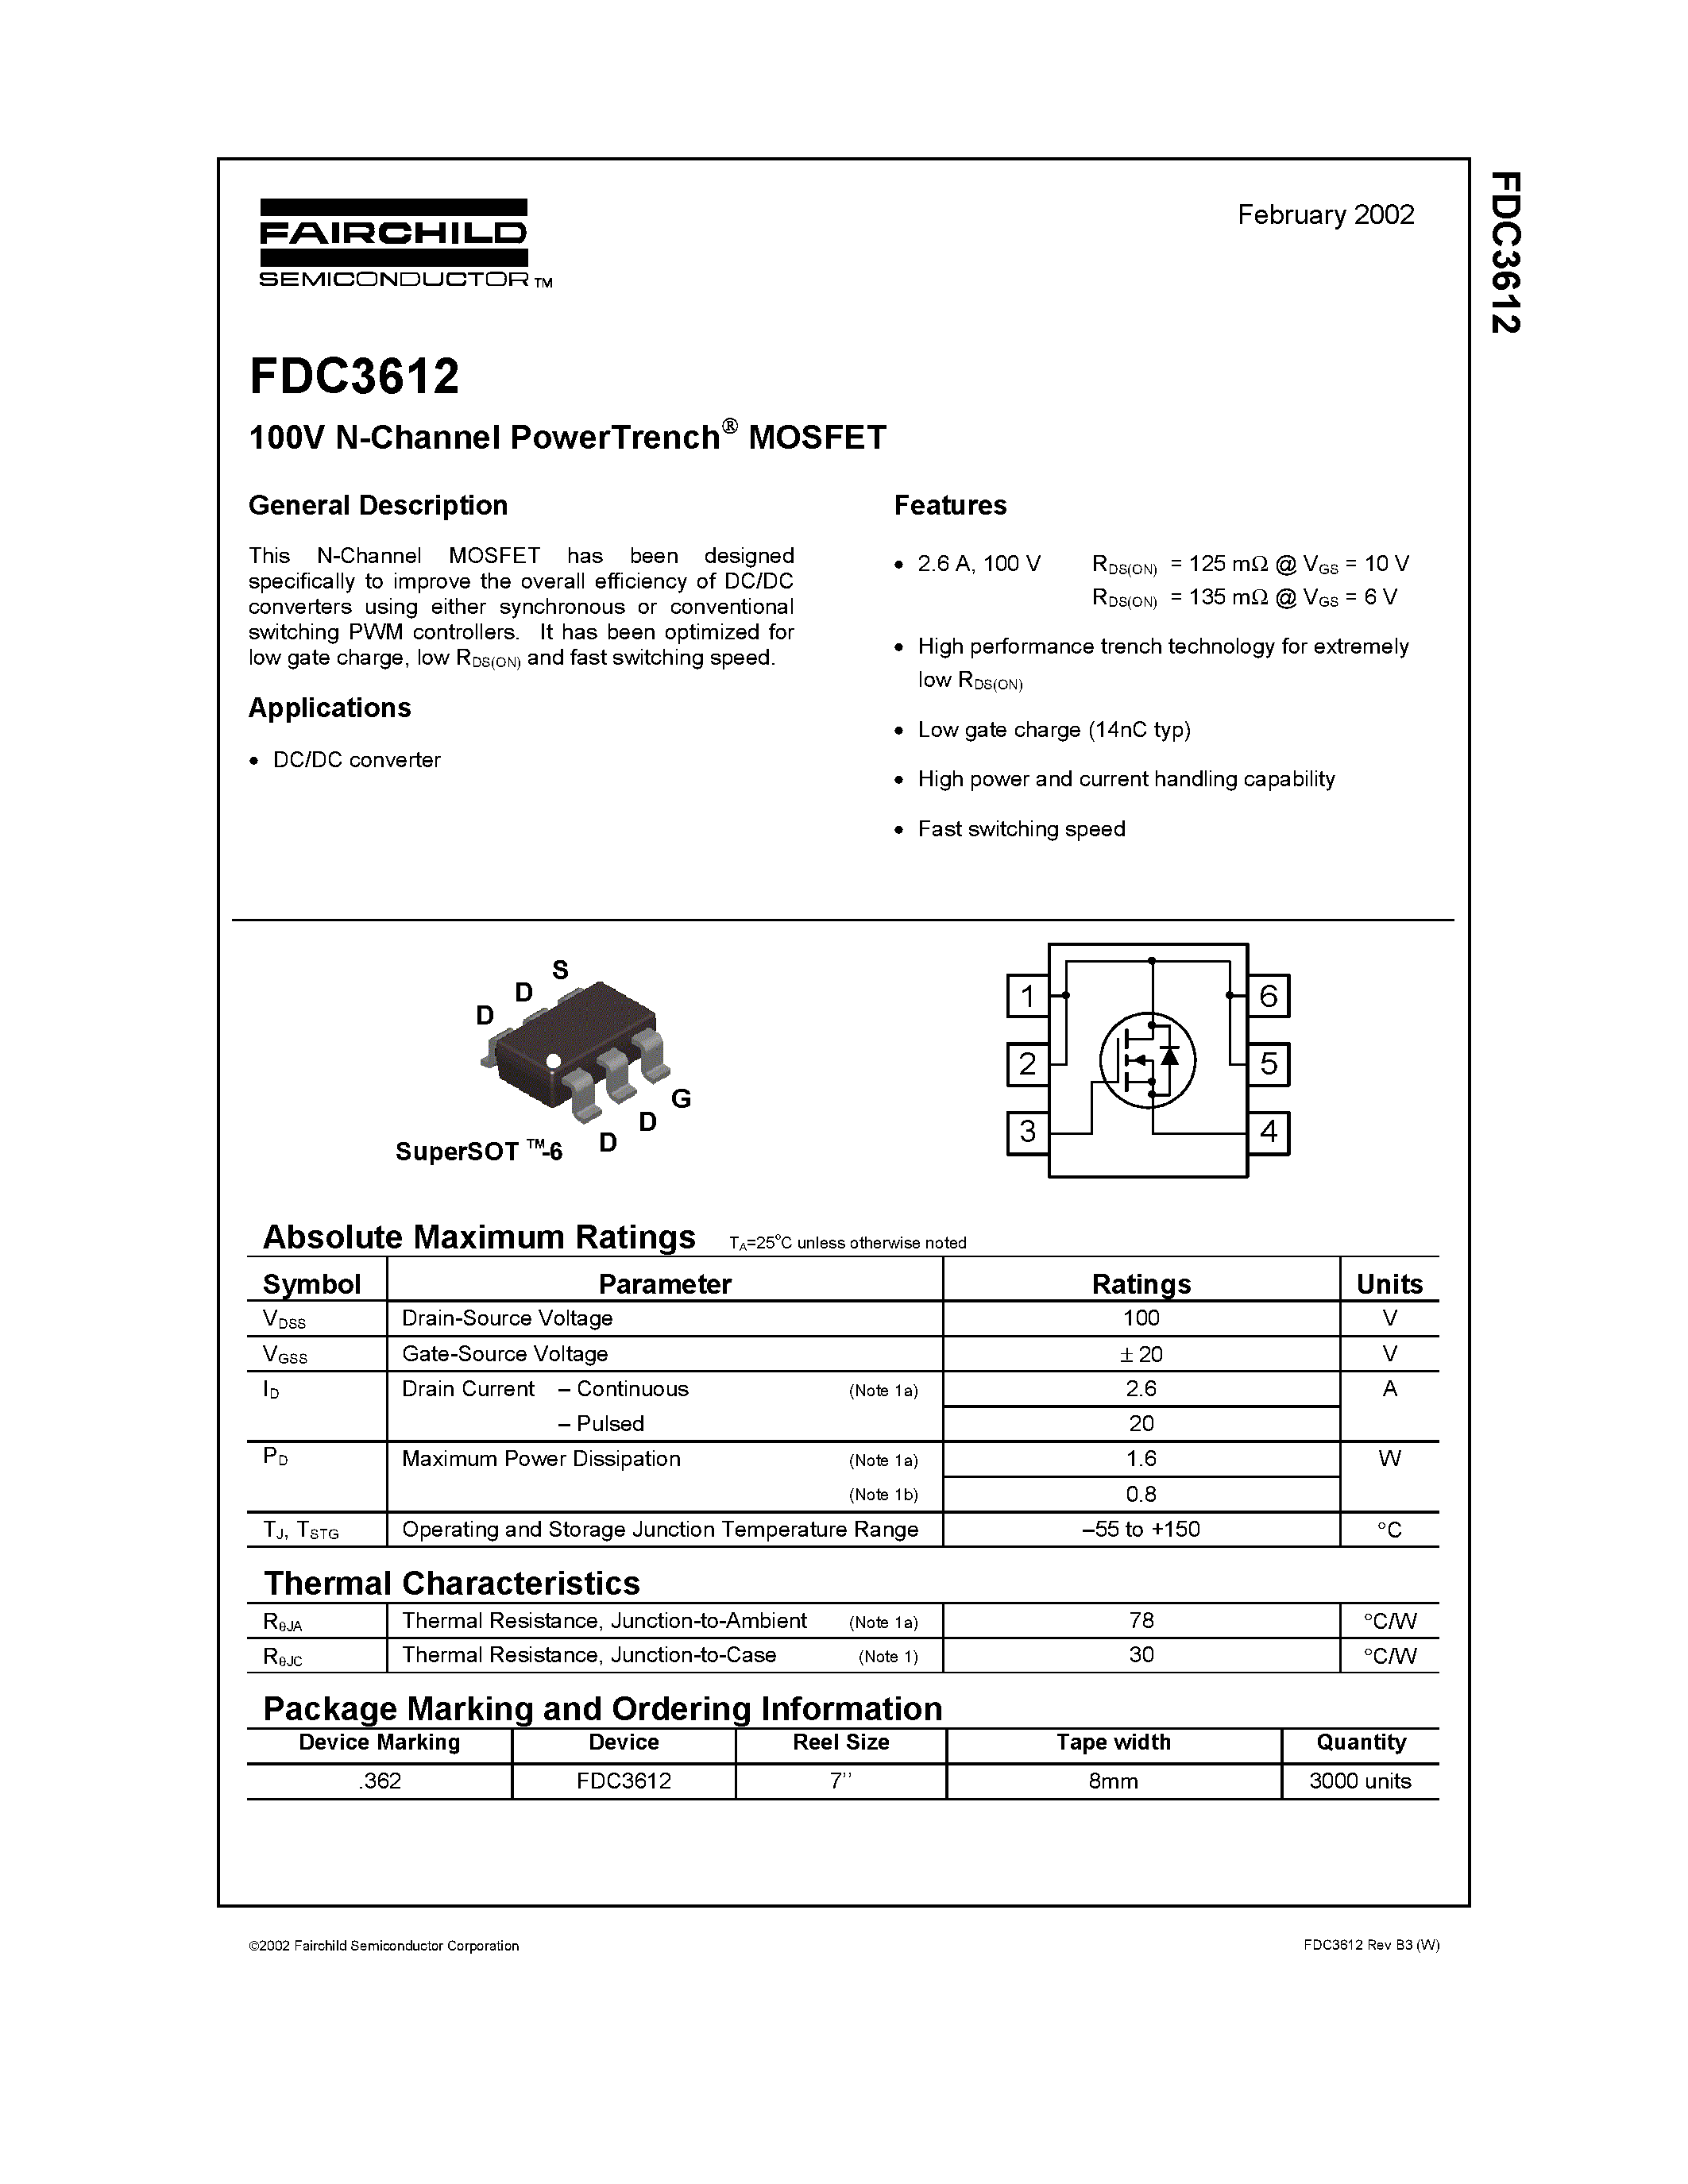 Datasheet FDC3612 - 100V N-Channel PowerTrench MOSFET page 1